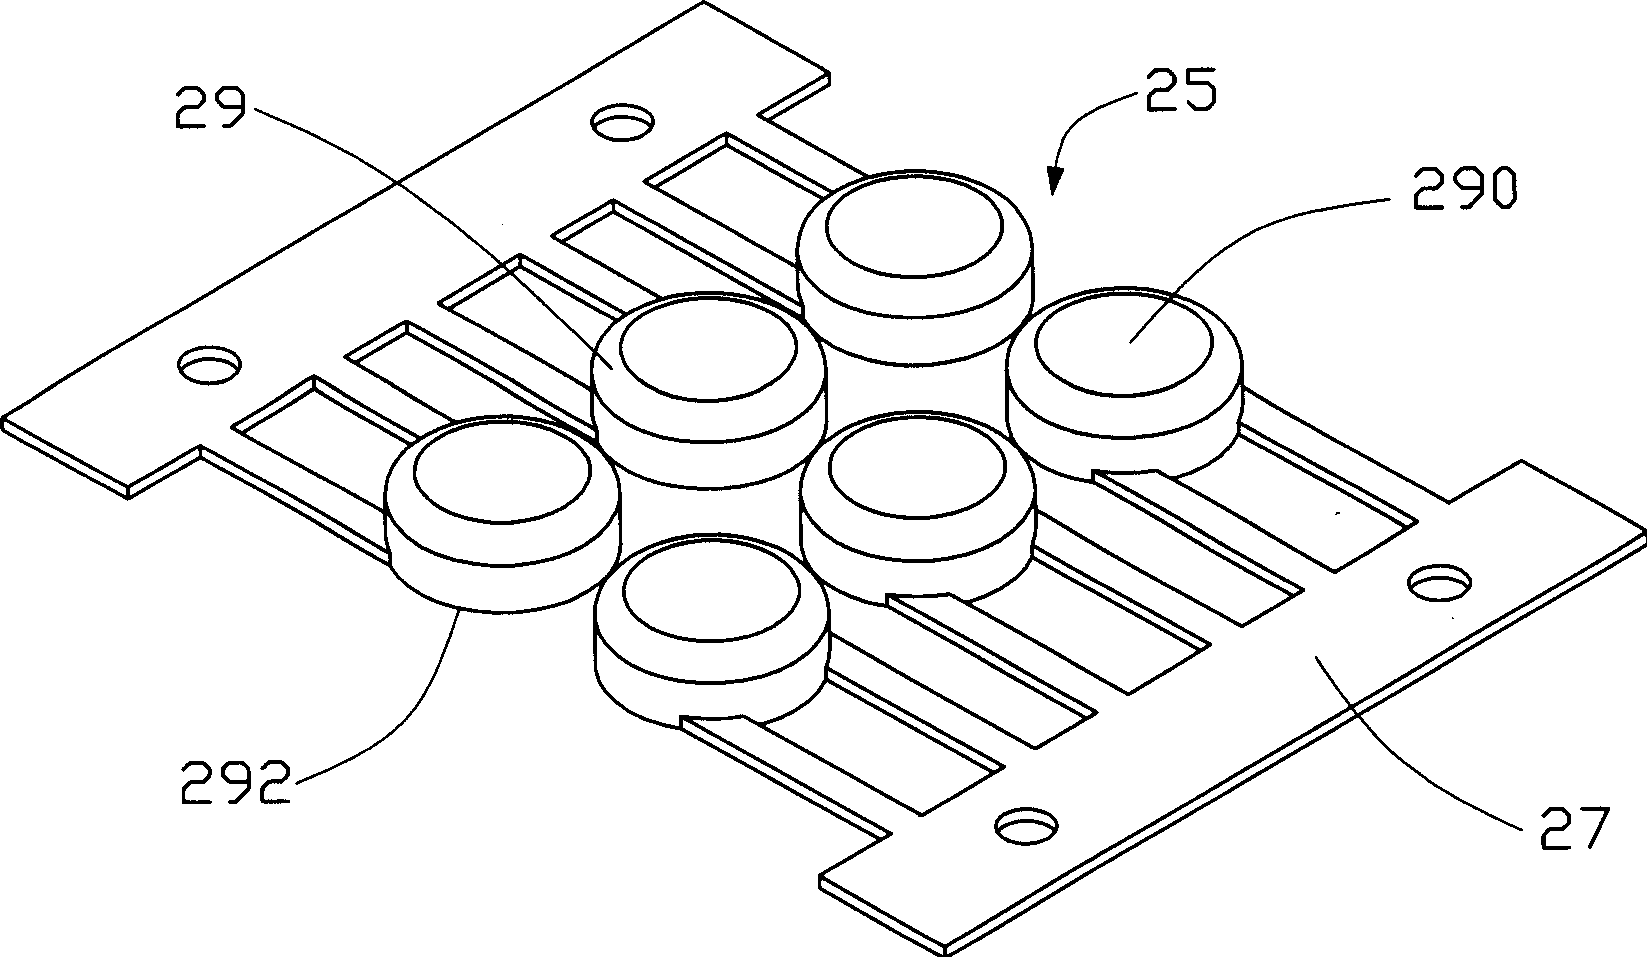 Multimedia playing device